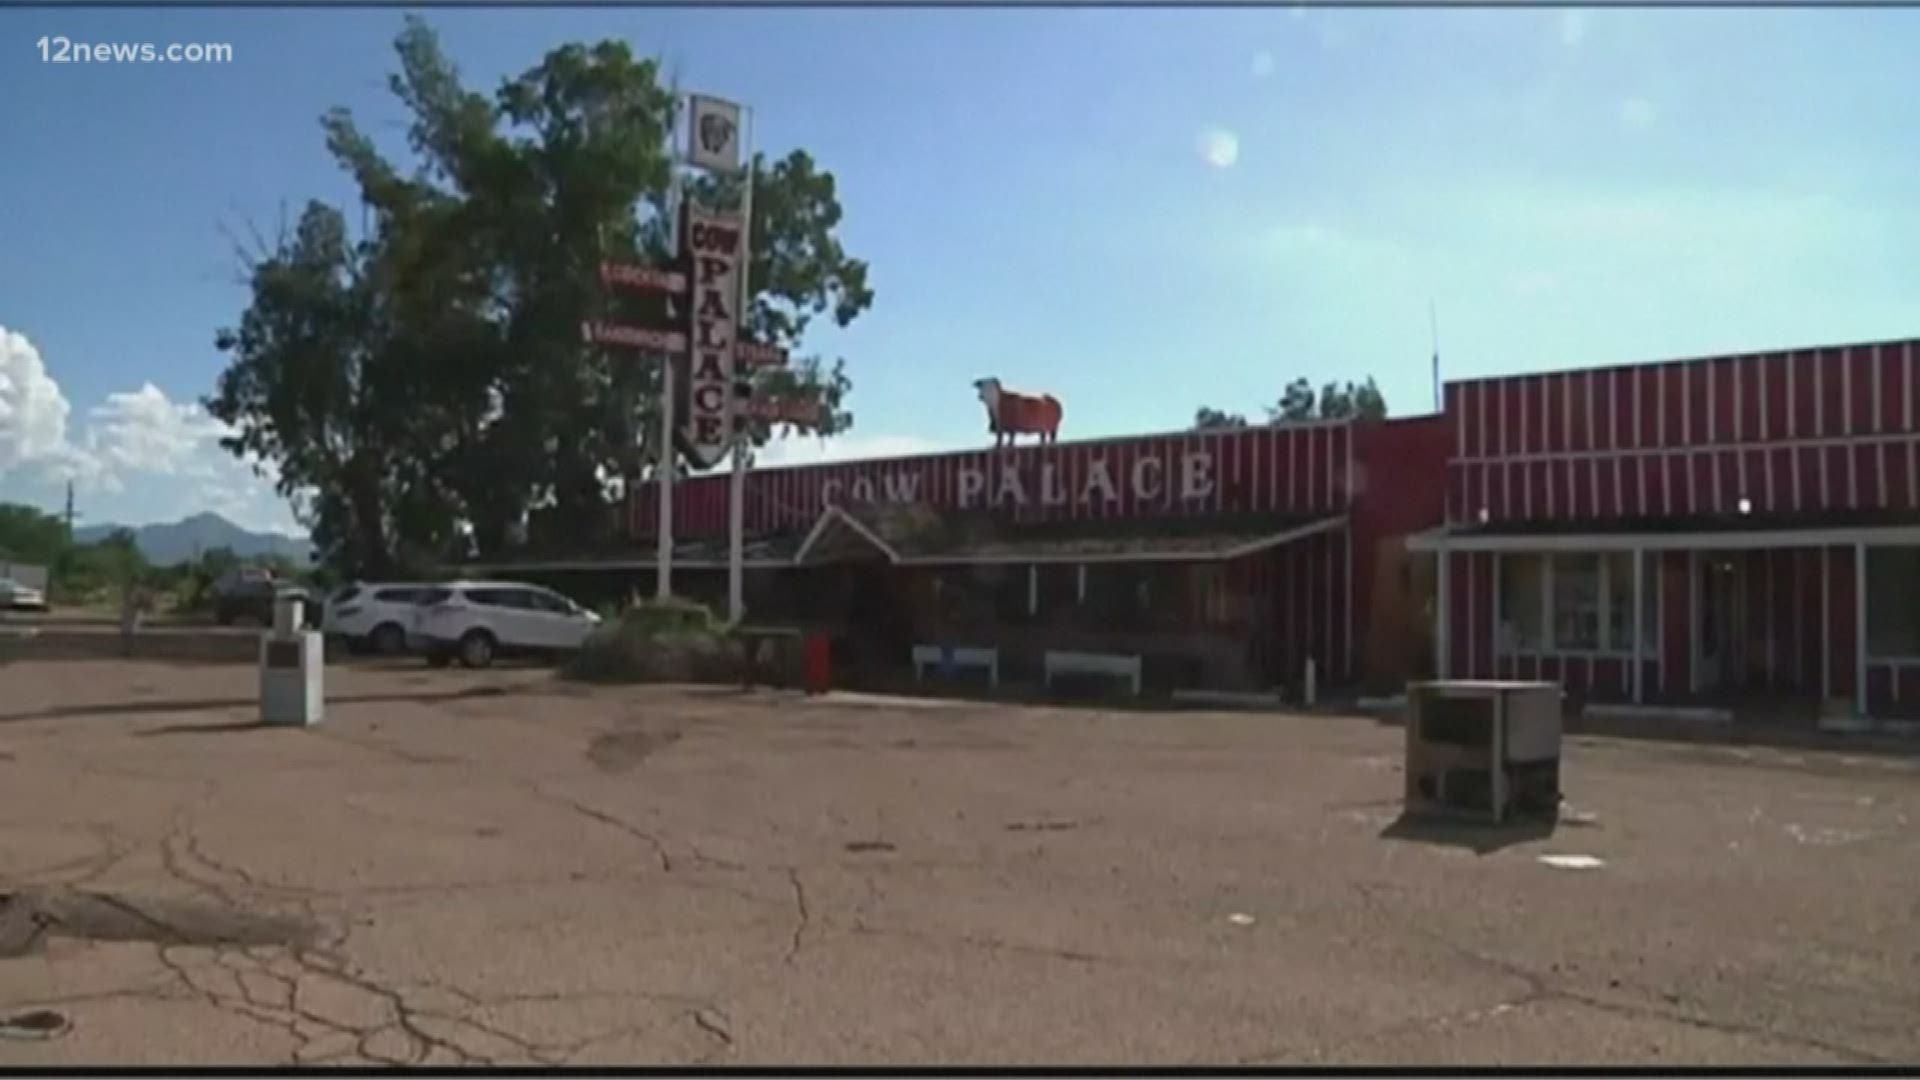 Cow Palace in Amado was hit hard by weekend monsoon storms. The restaurant was flooded with nearly two feet of water sending furniture and memorabilia into the parking lot.